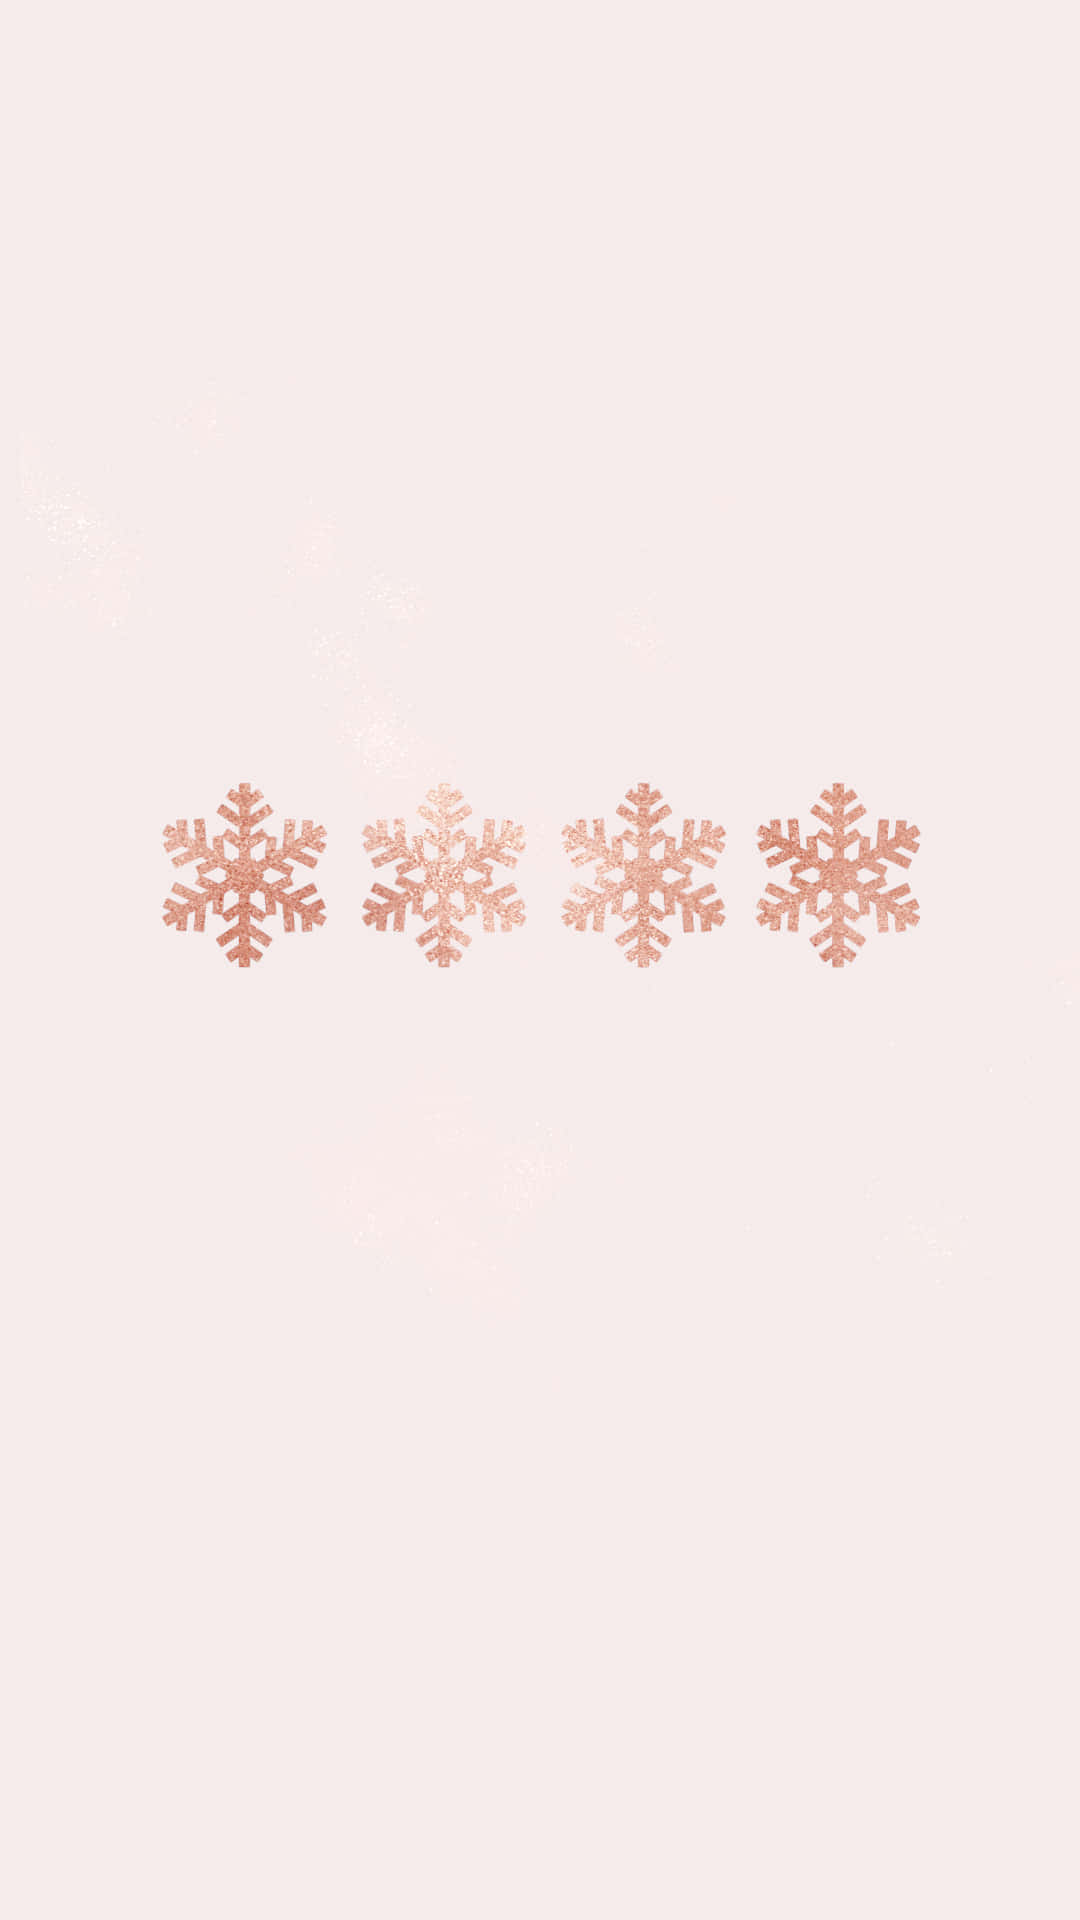 Celebrate the festive season with this cute pink Christmas tree Wallpaper